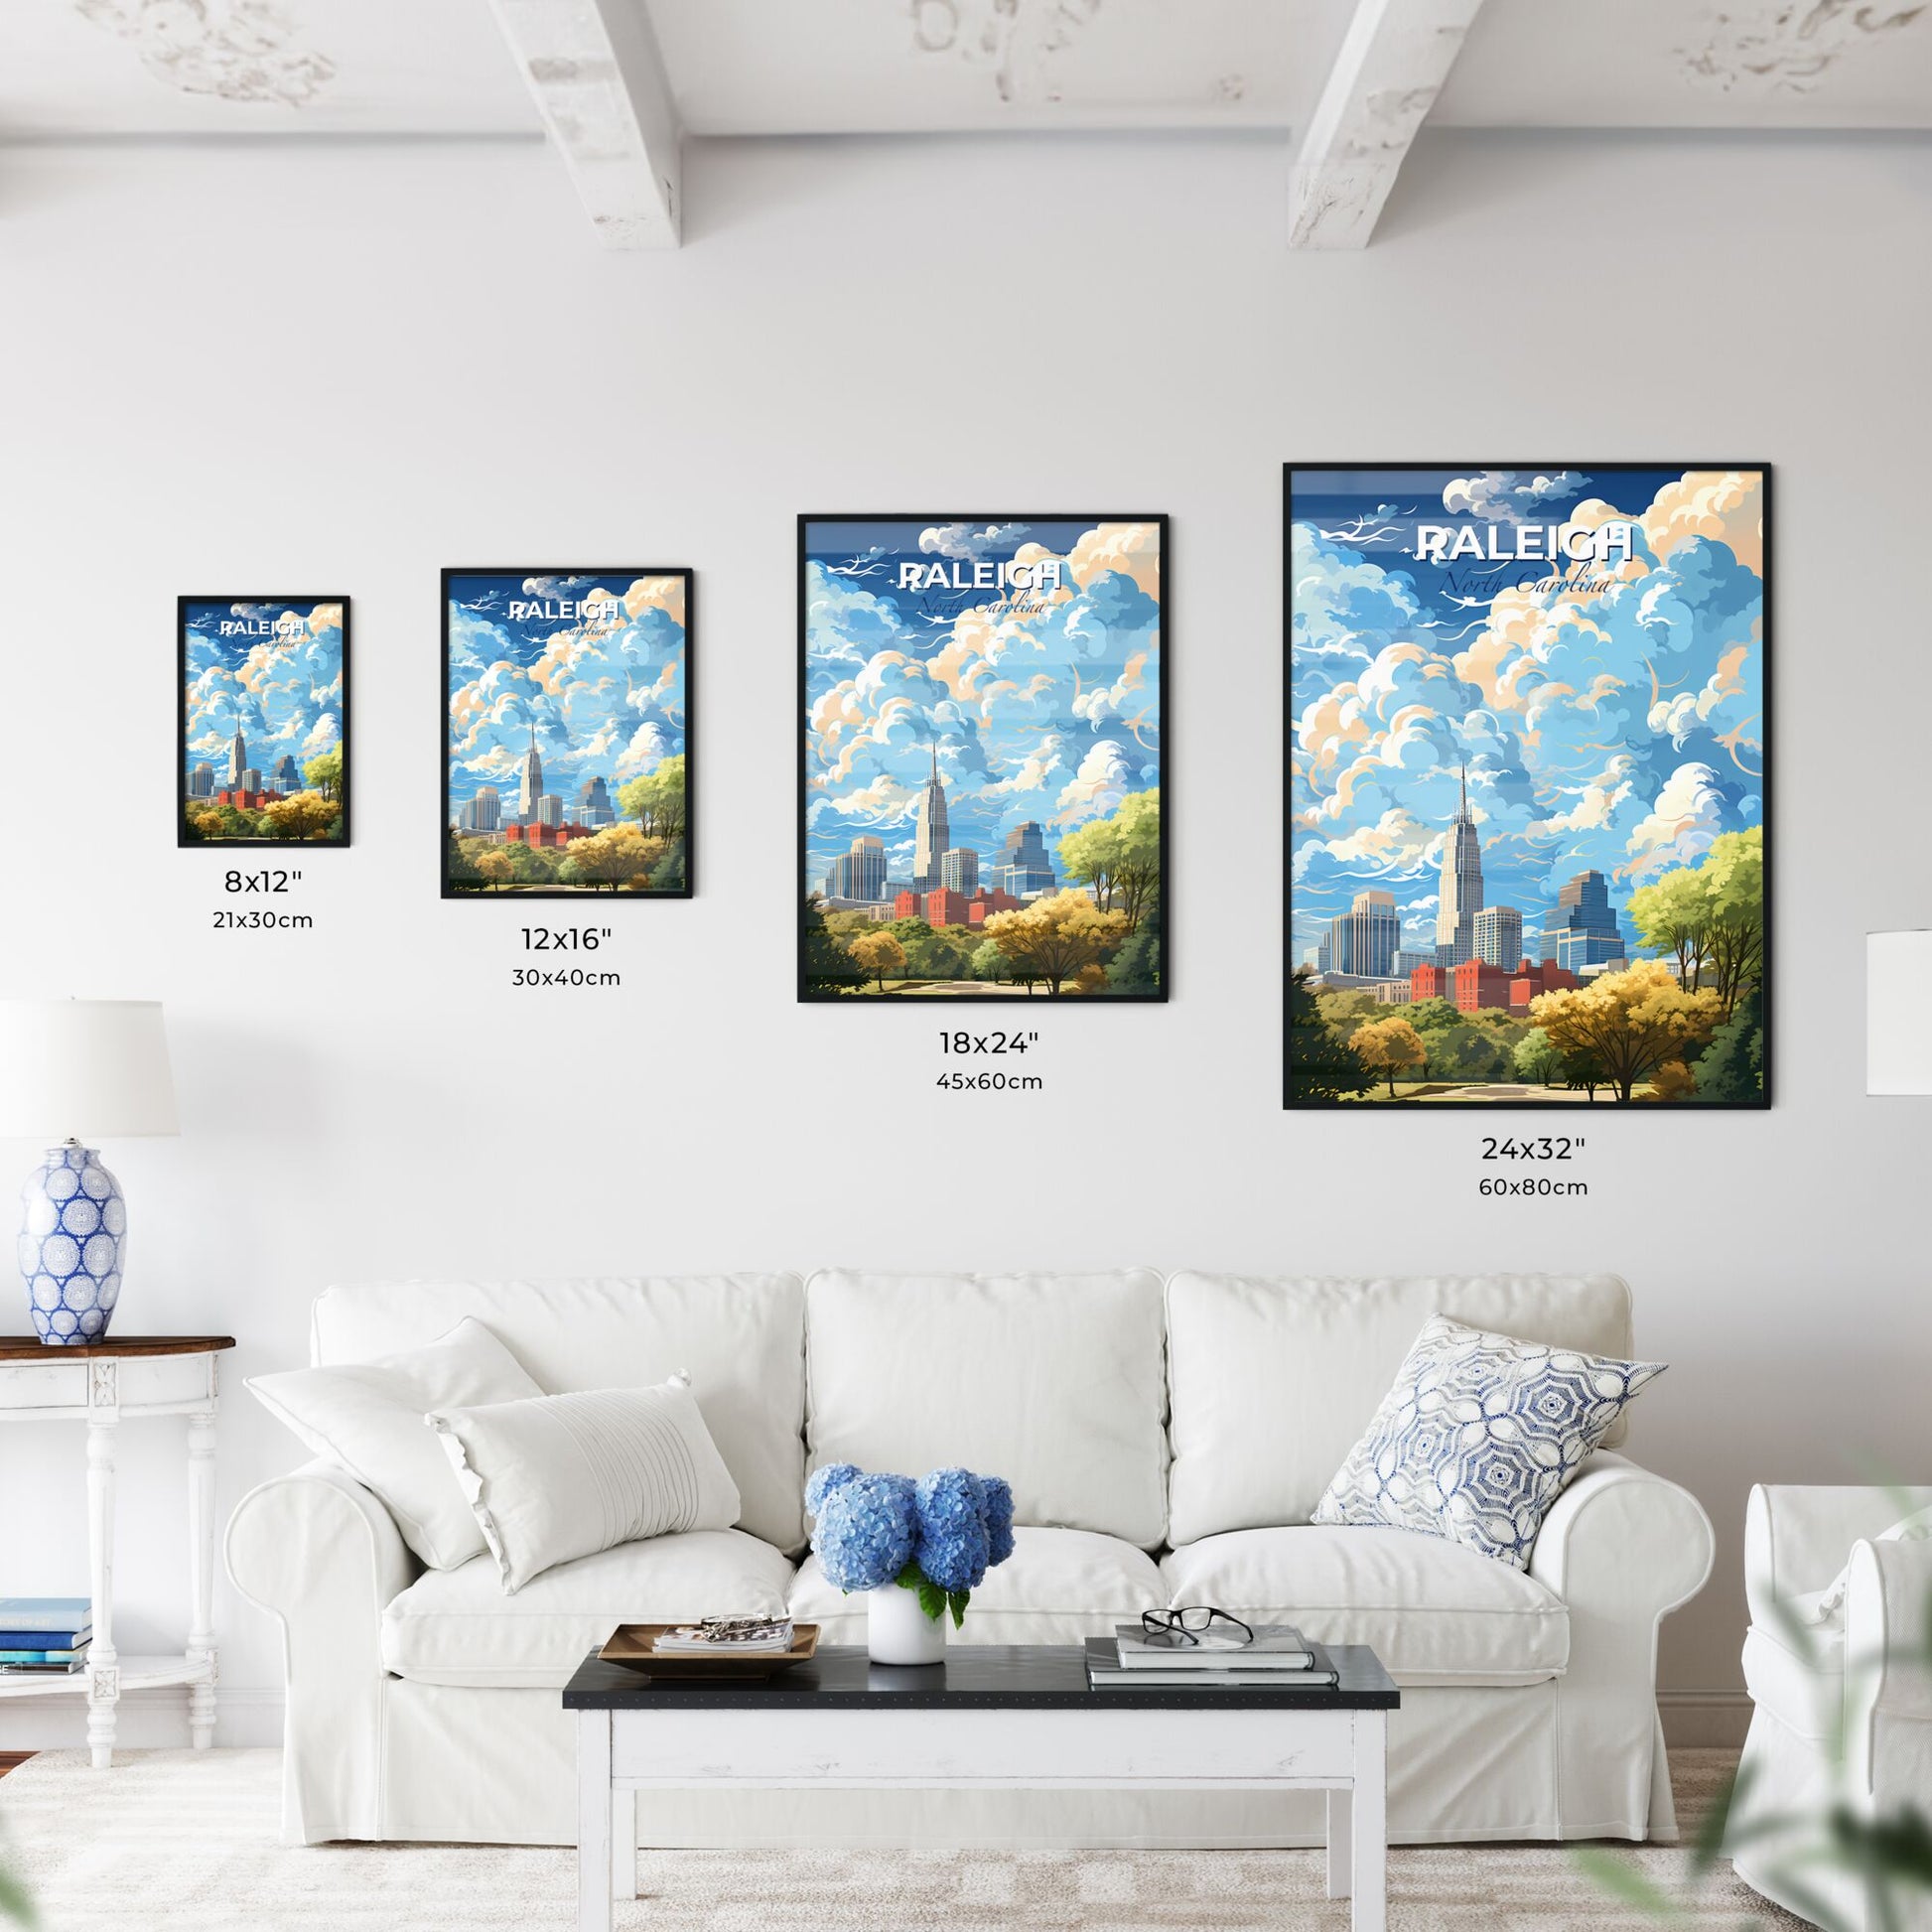 Raleigh North Carolina Skyline - A Cityscape With Clouds And Trees - Customizable Travel Gift Default Title